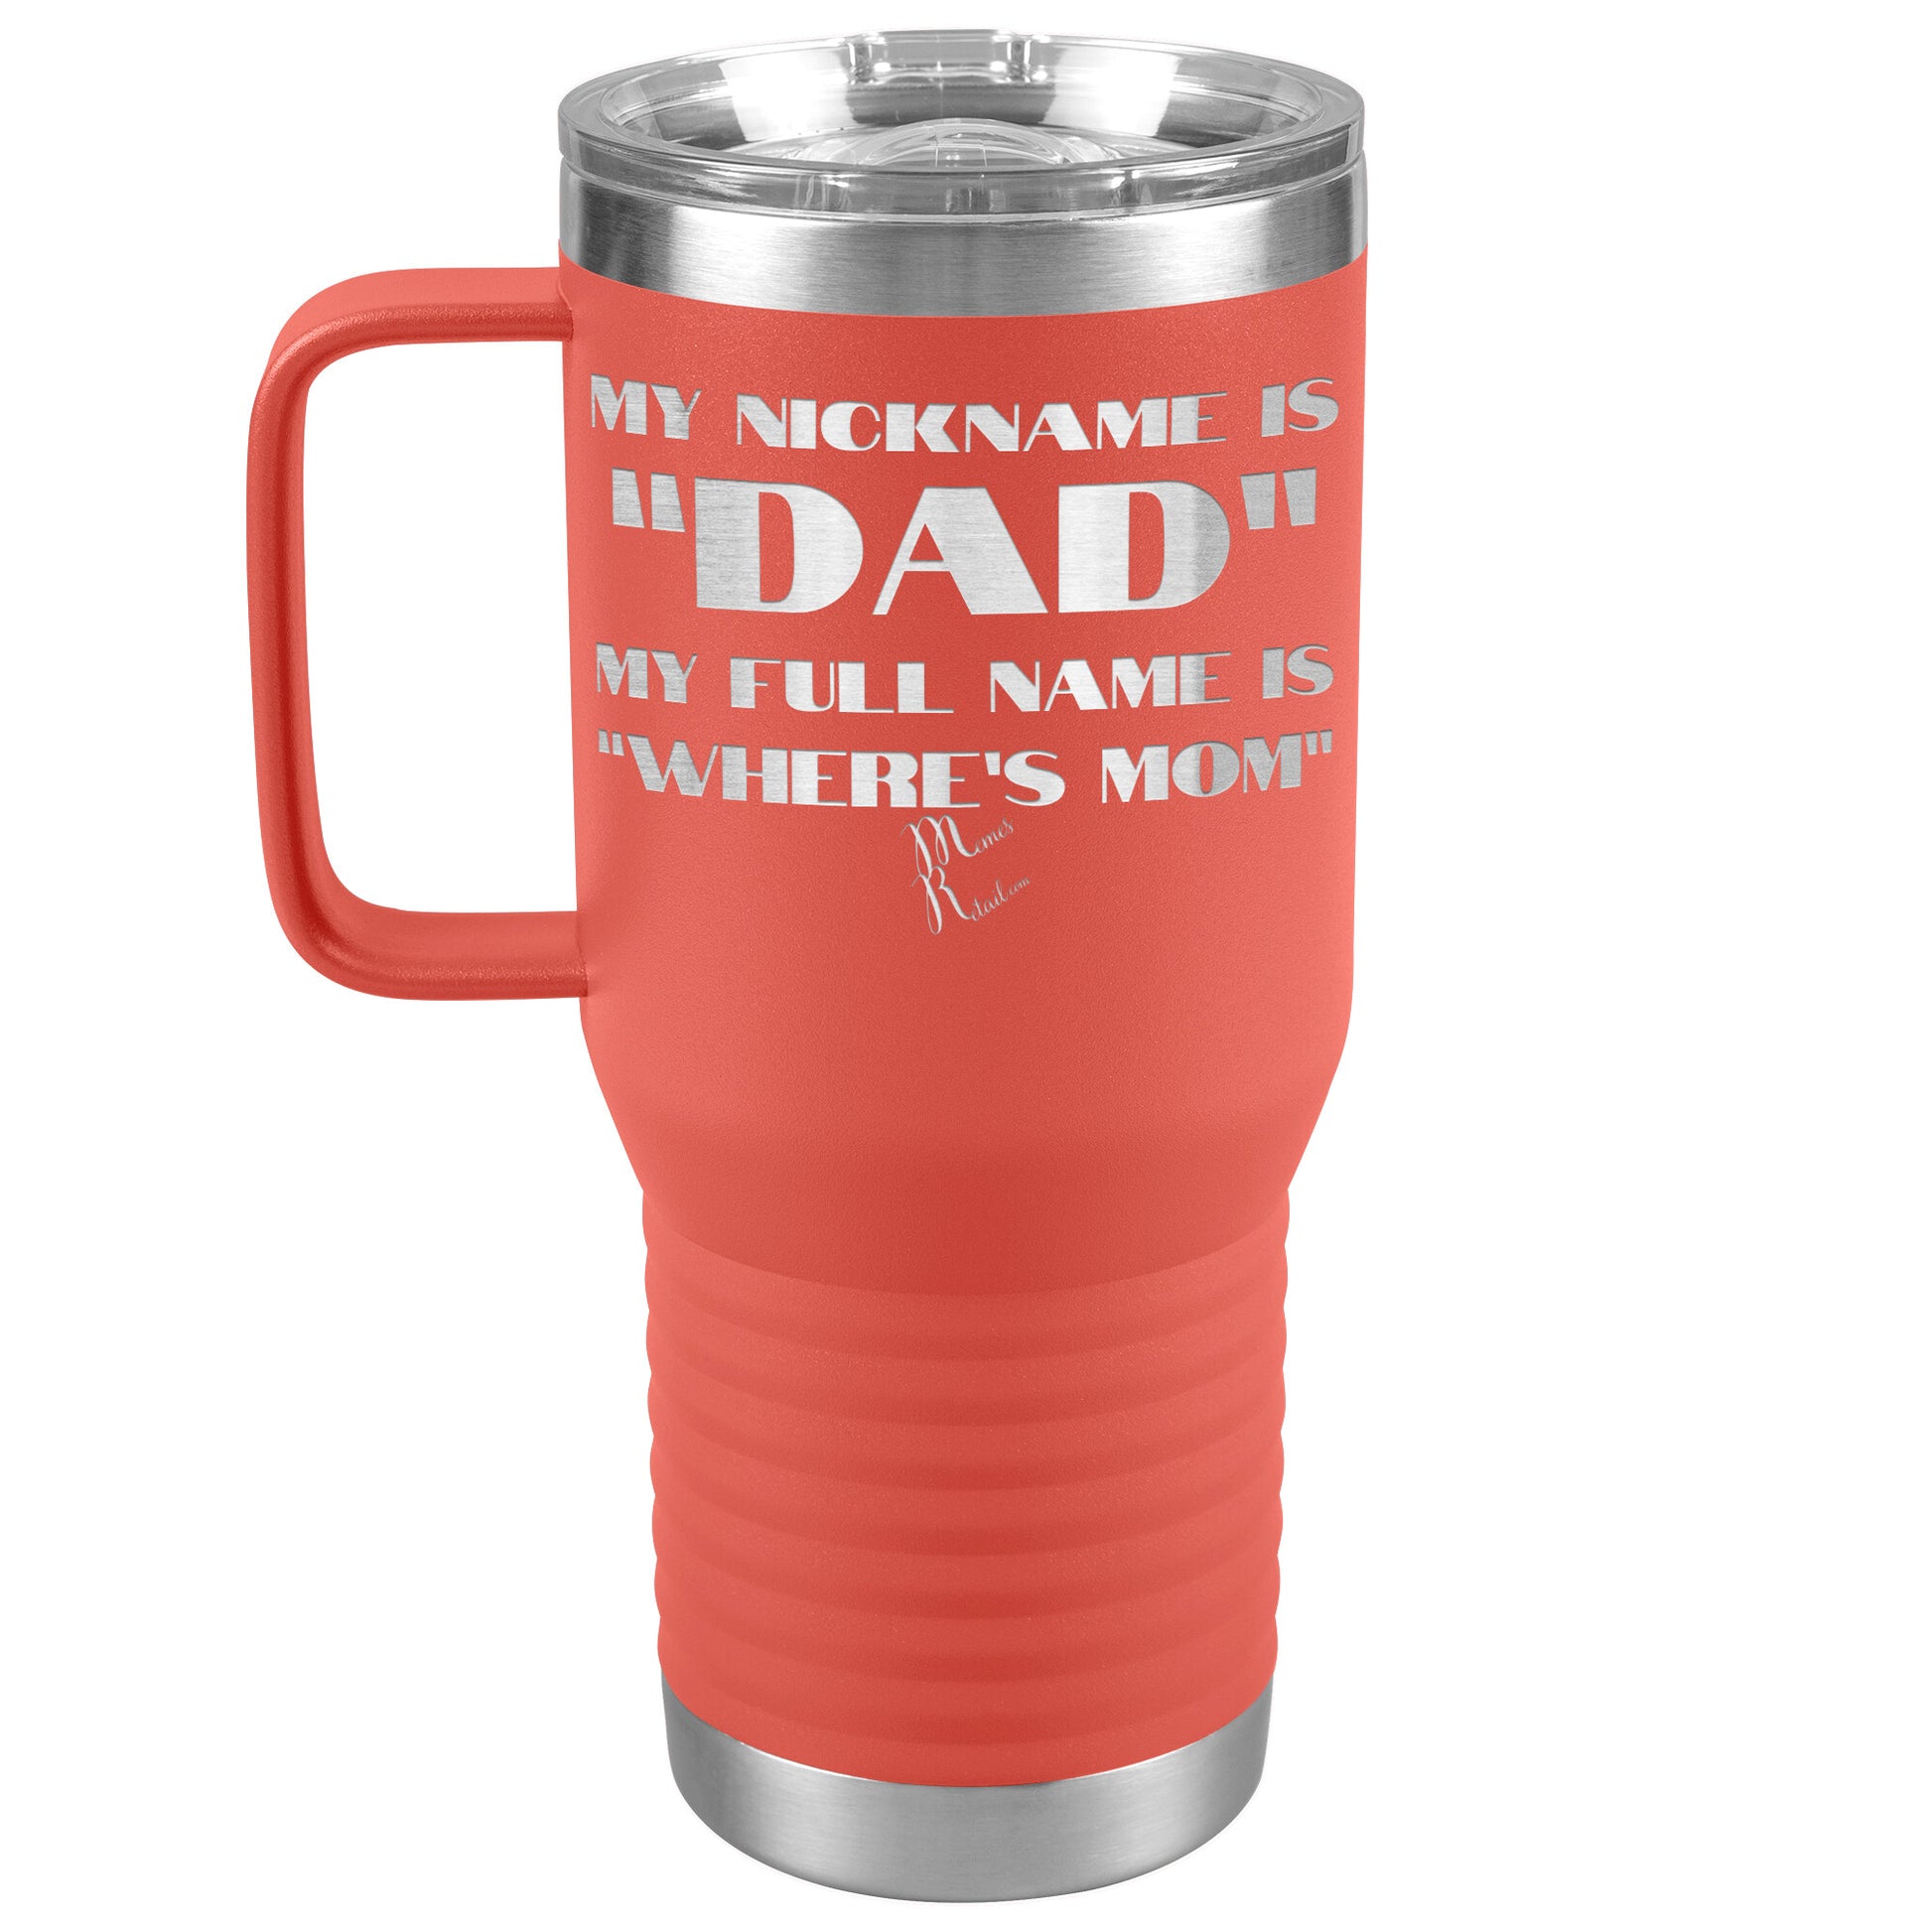 My Nickname is "Dad", My Full Name is "Where's Mom" Tumblers, 20oz Travel Tumbler / Coral - MemesRetail.com